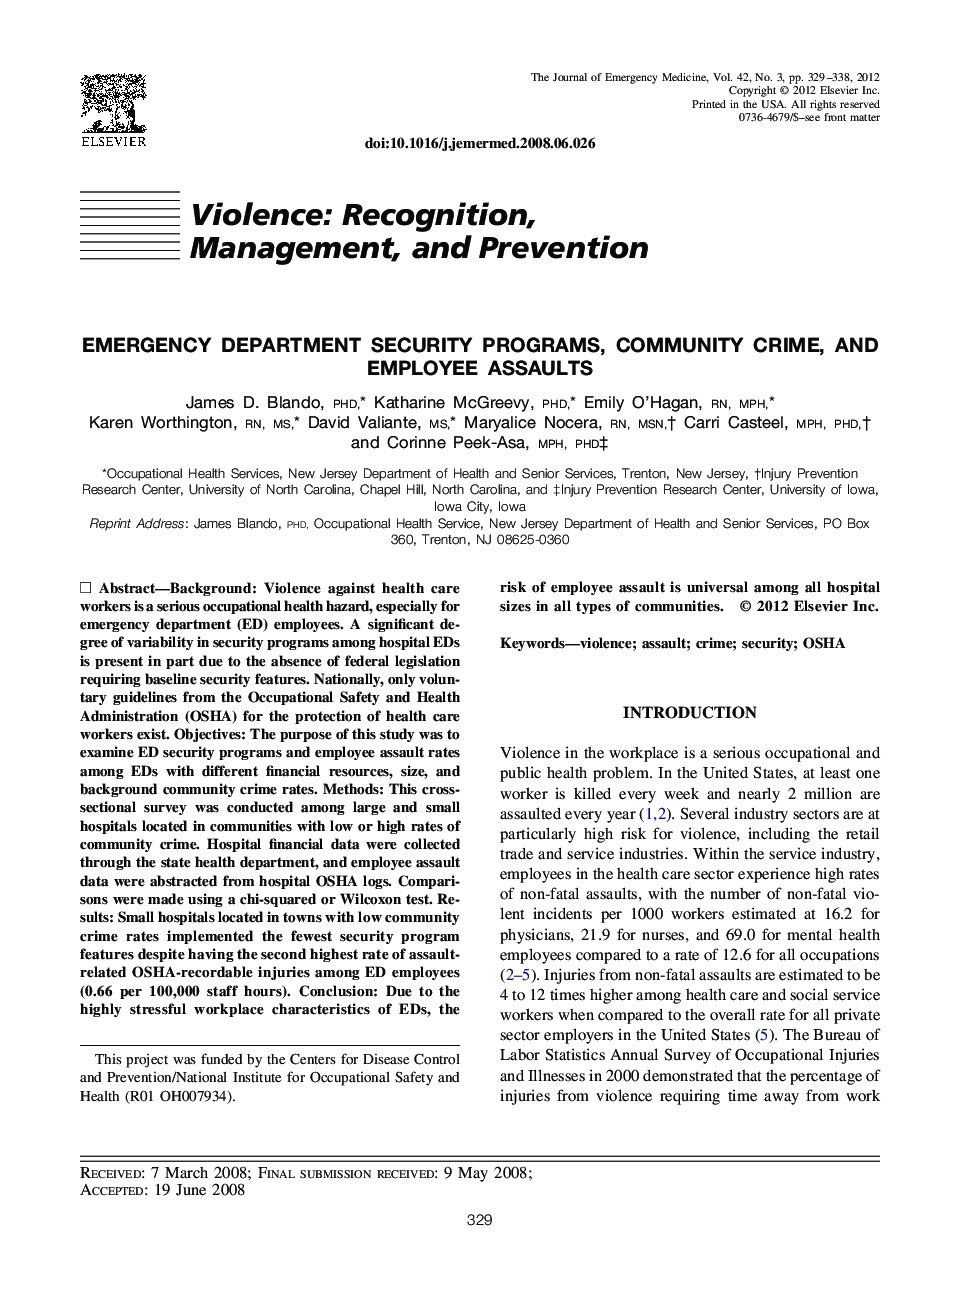 Emergency Department Security Programs, Community Crime, and Employee Assaults 